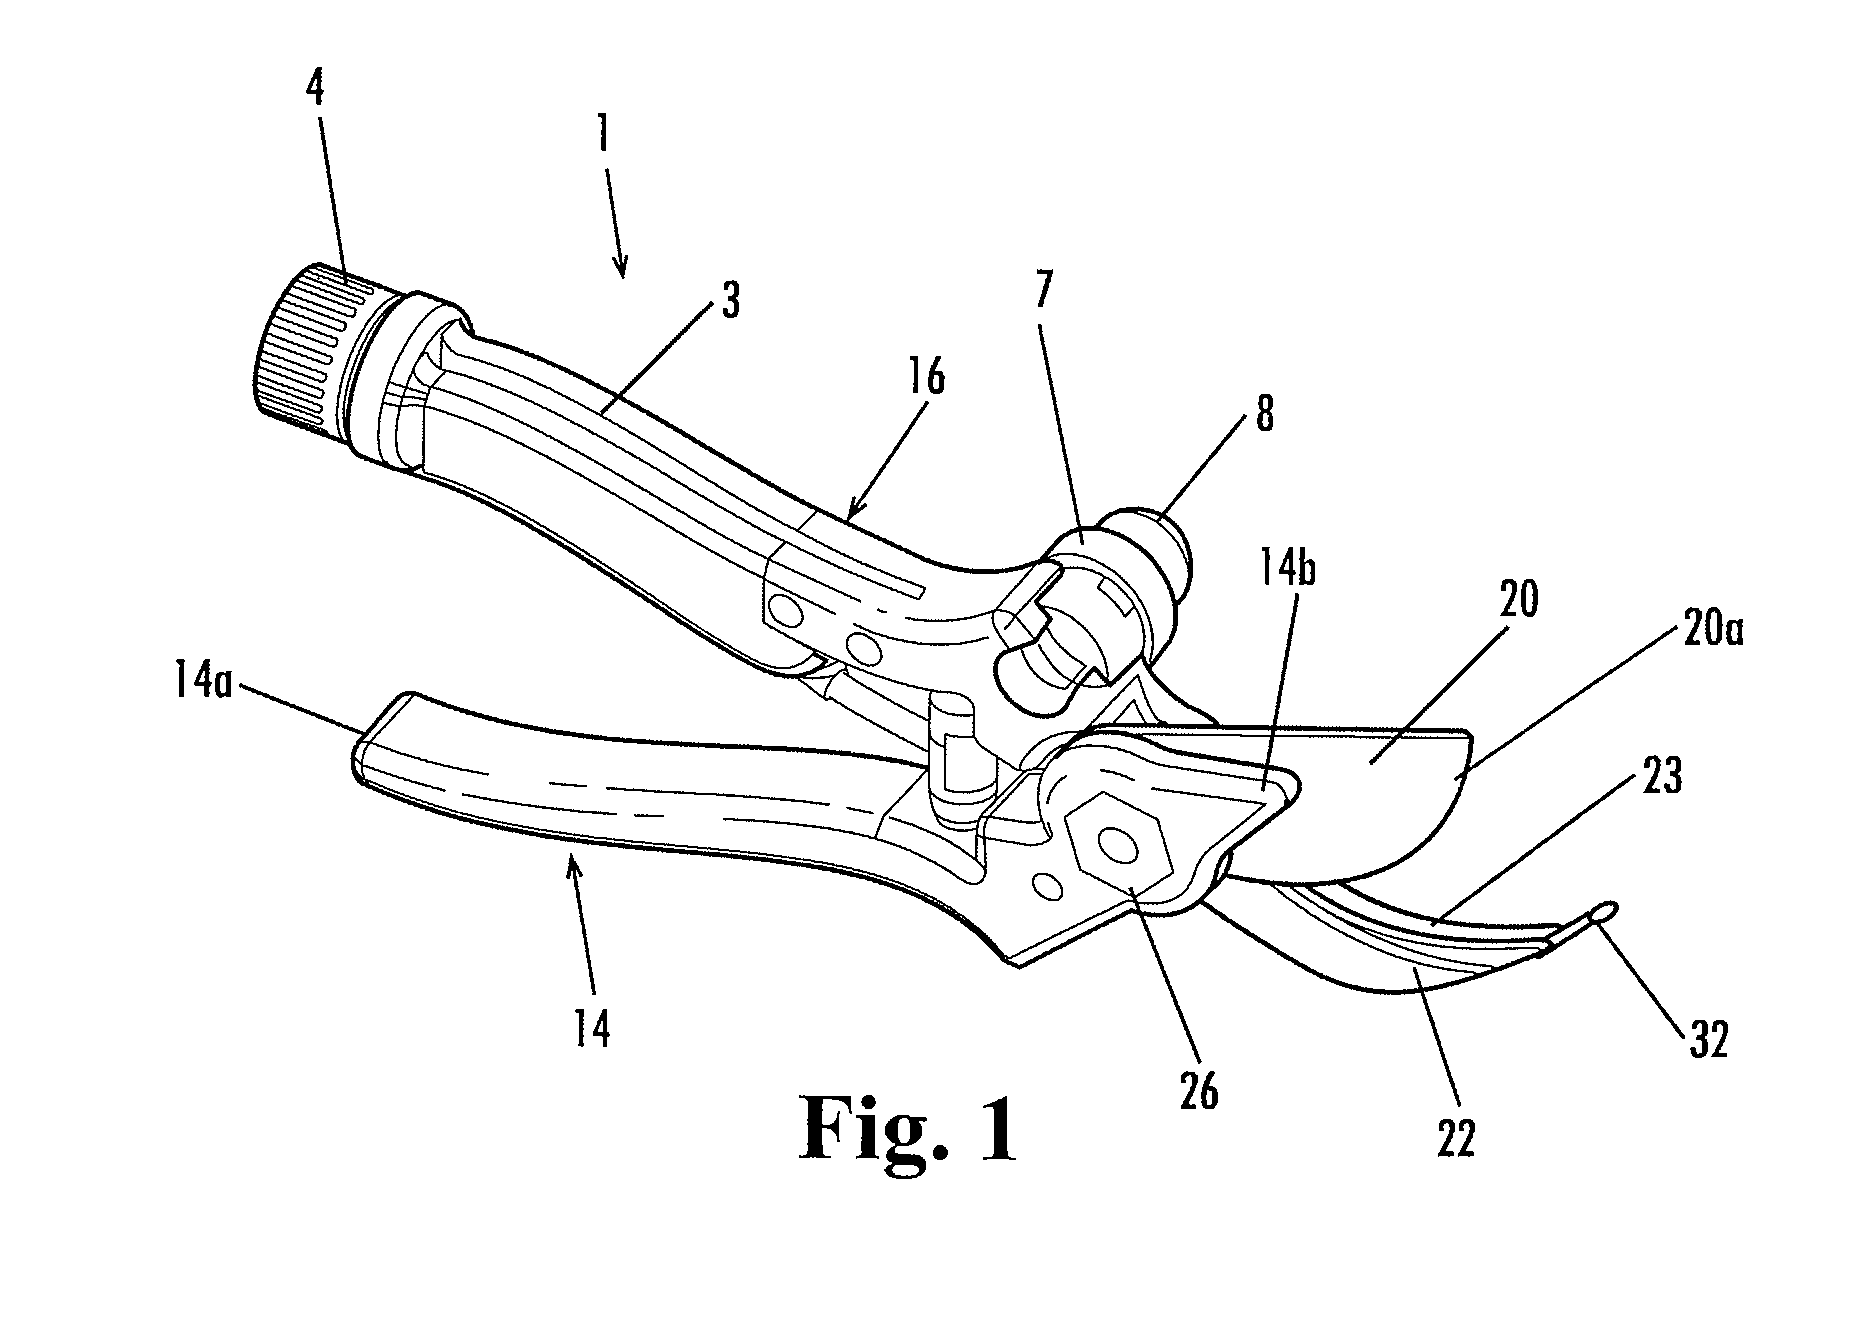 Pruning clipper for dispensing a chemical treatment